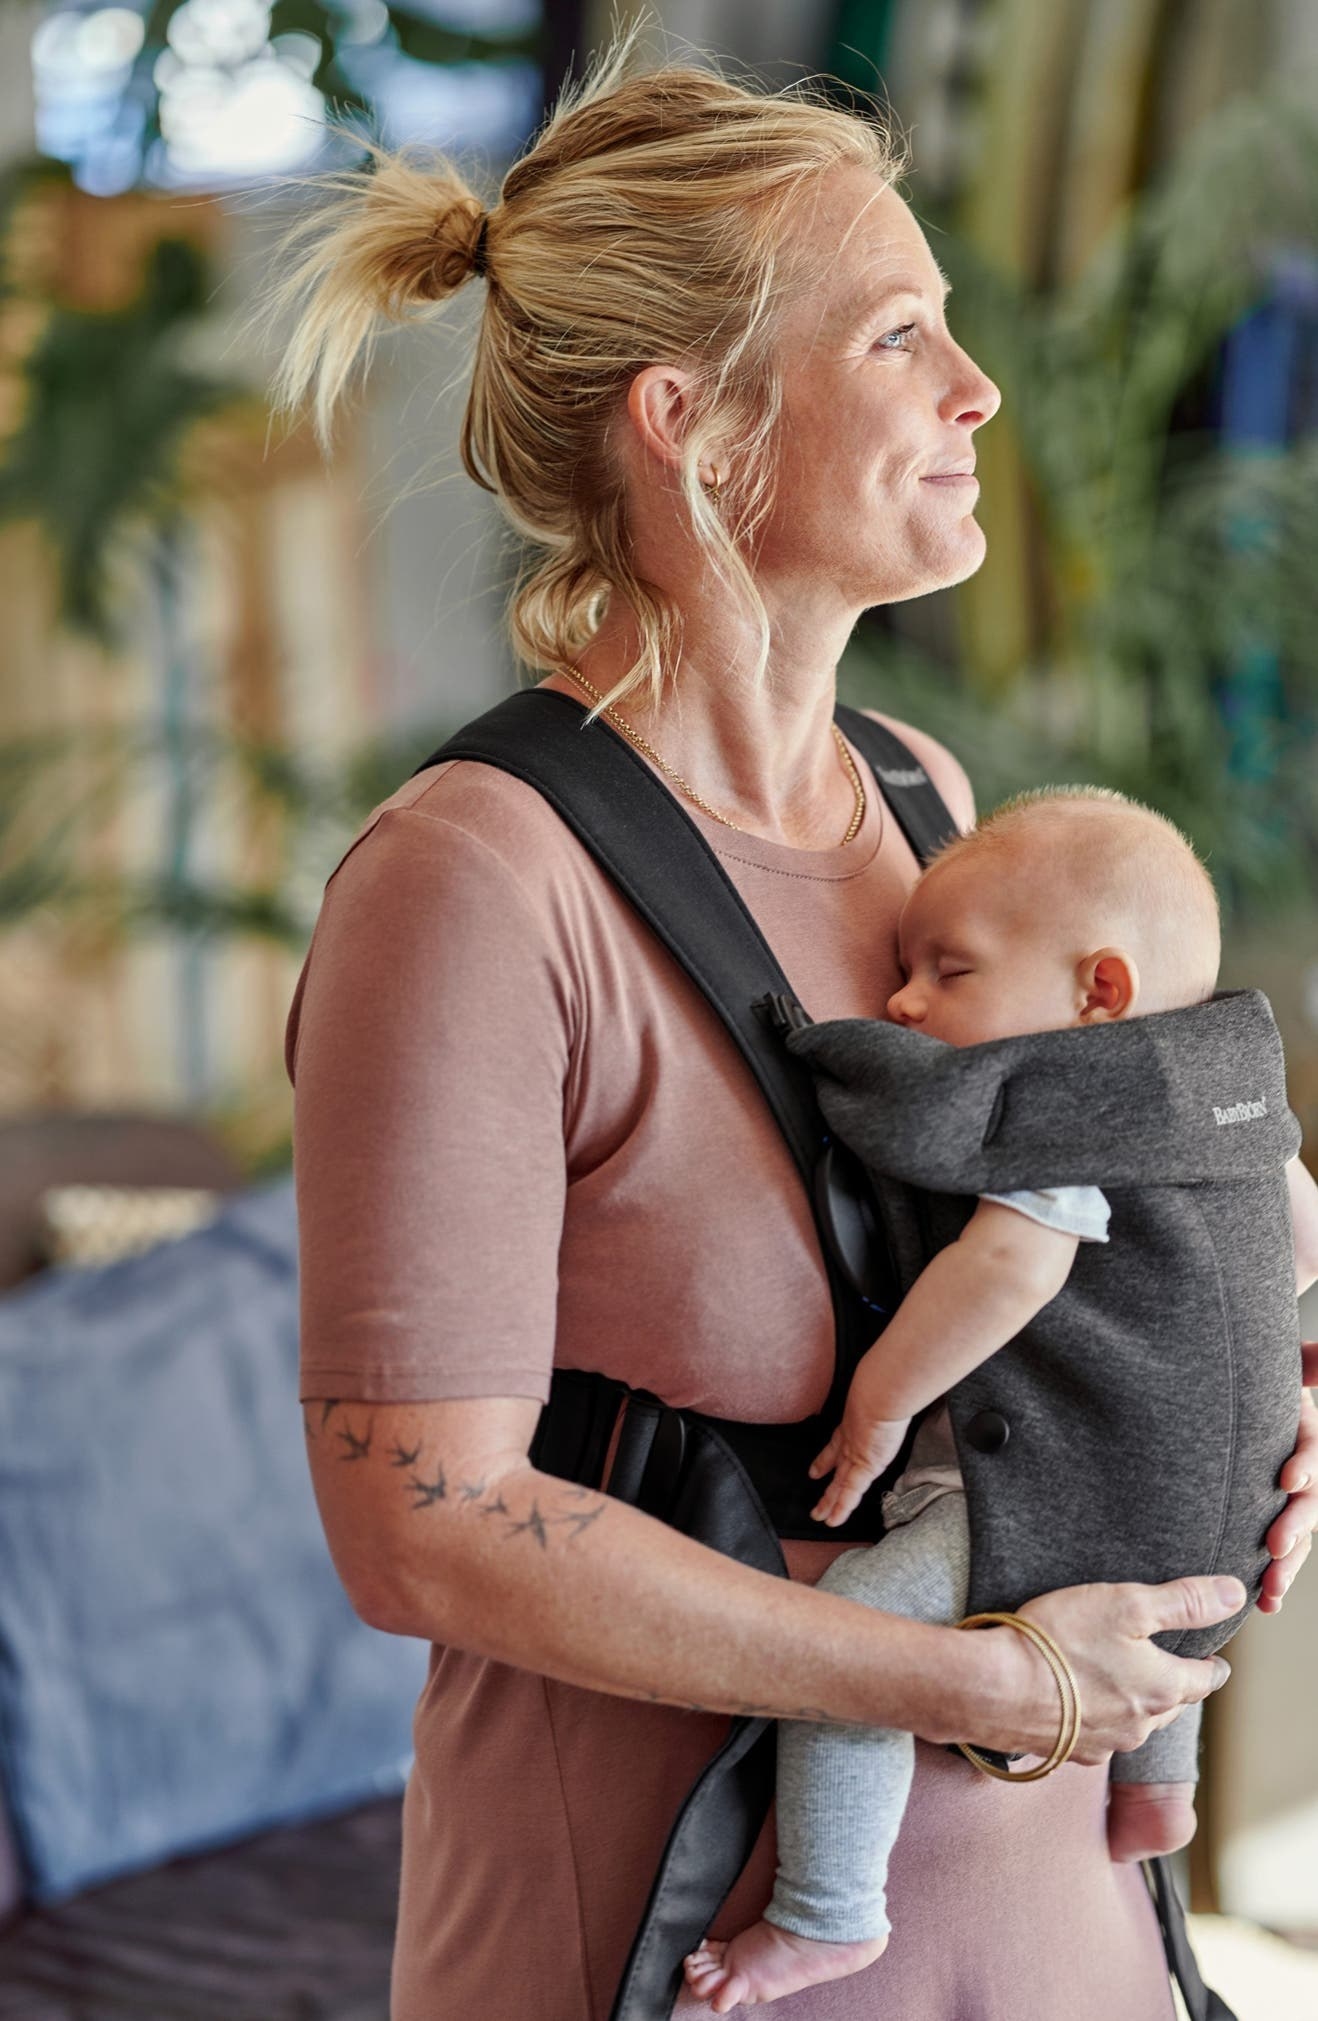 Model uses the dark gray baby carrier to hold her baby